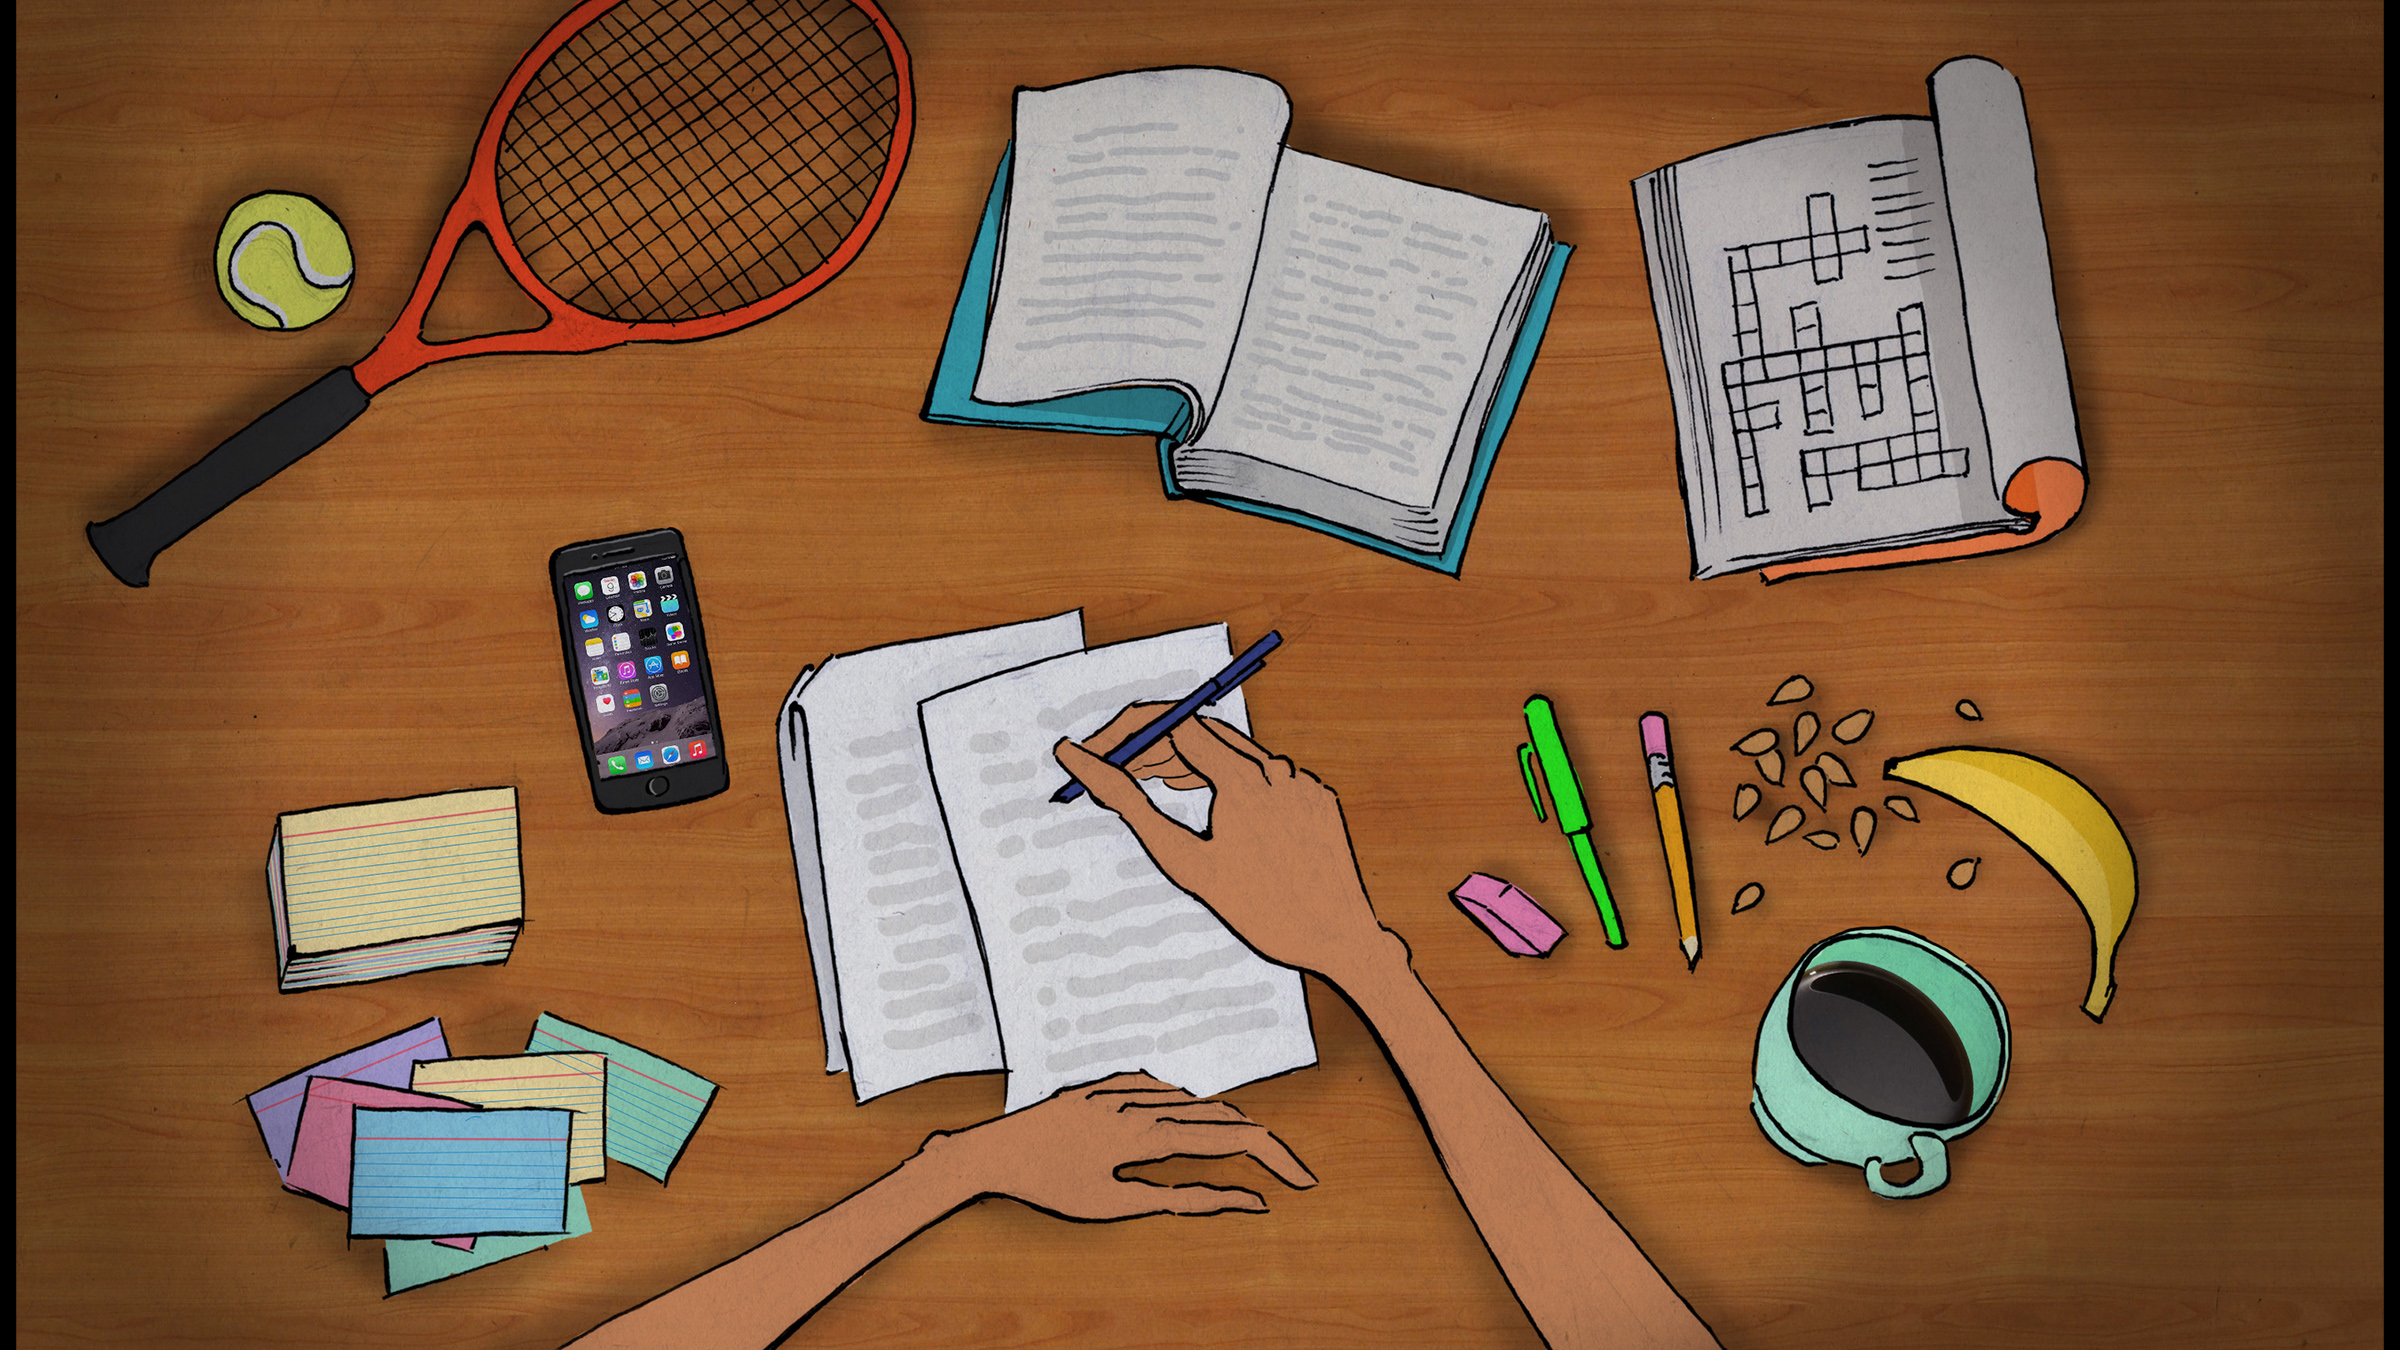 A hand writes on paper amidst a desk strewn with items including a coffee cup, snacks, a book of puzzles and a tennis racquet